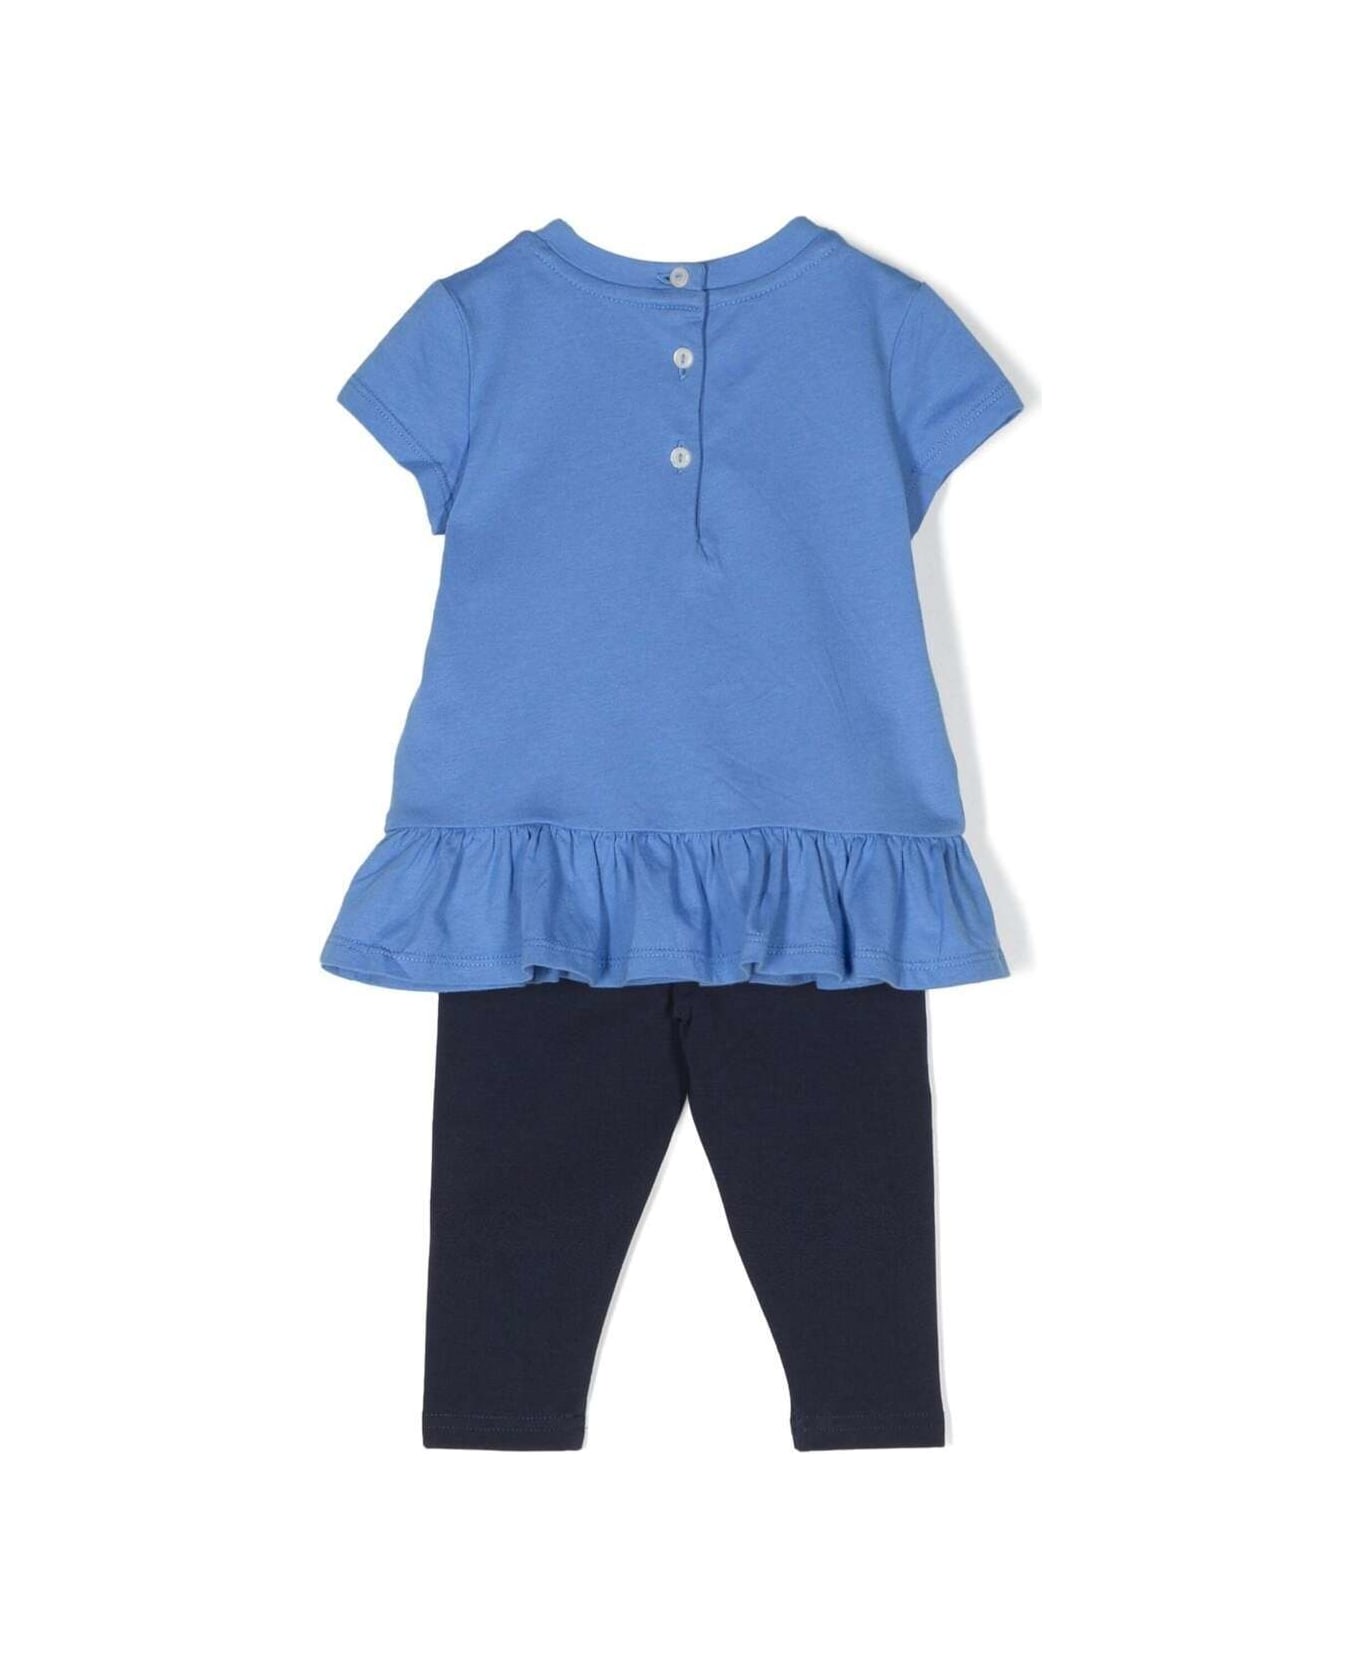 Polo Ralph Lauren Blue And Black Set With Top And Leggings With Teddy Bear Print In Cotton Baby - Blu ボトムス